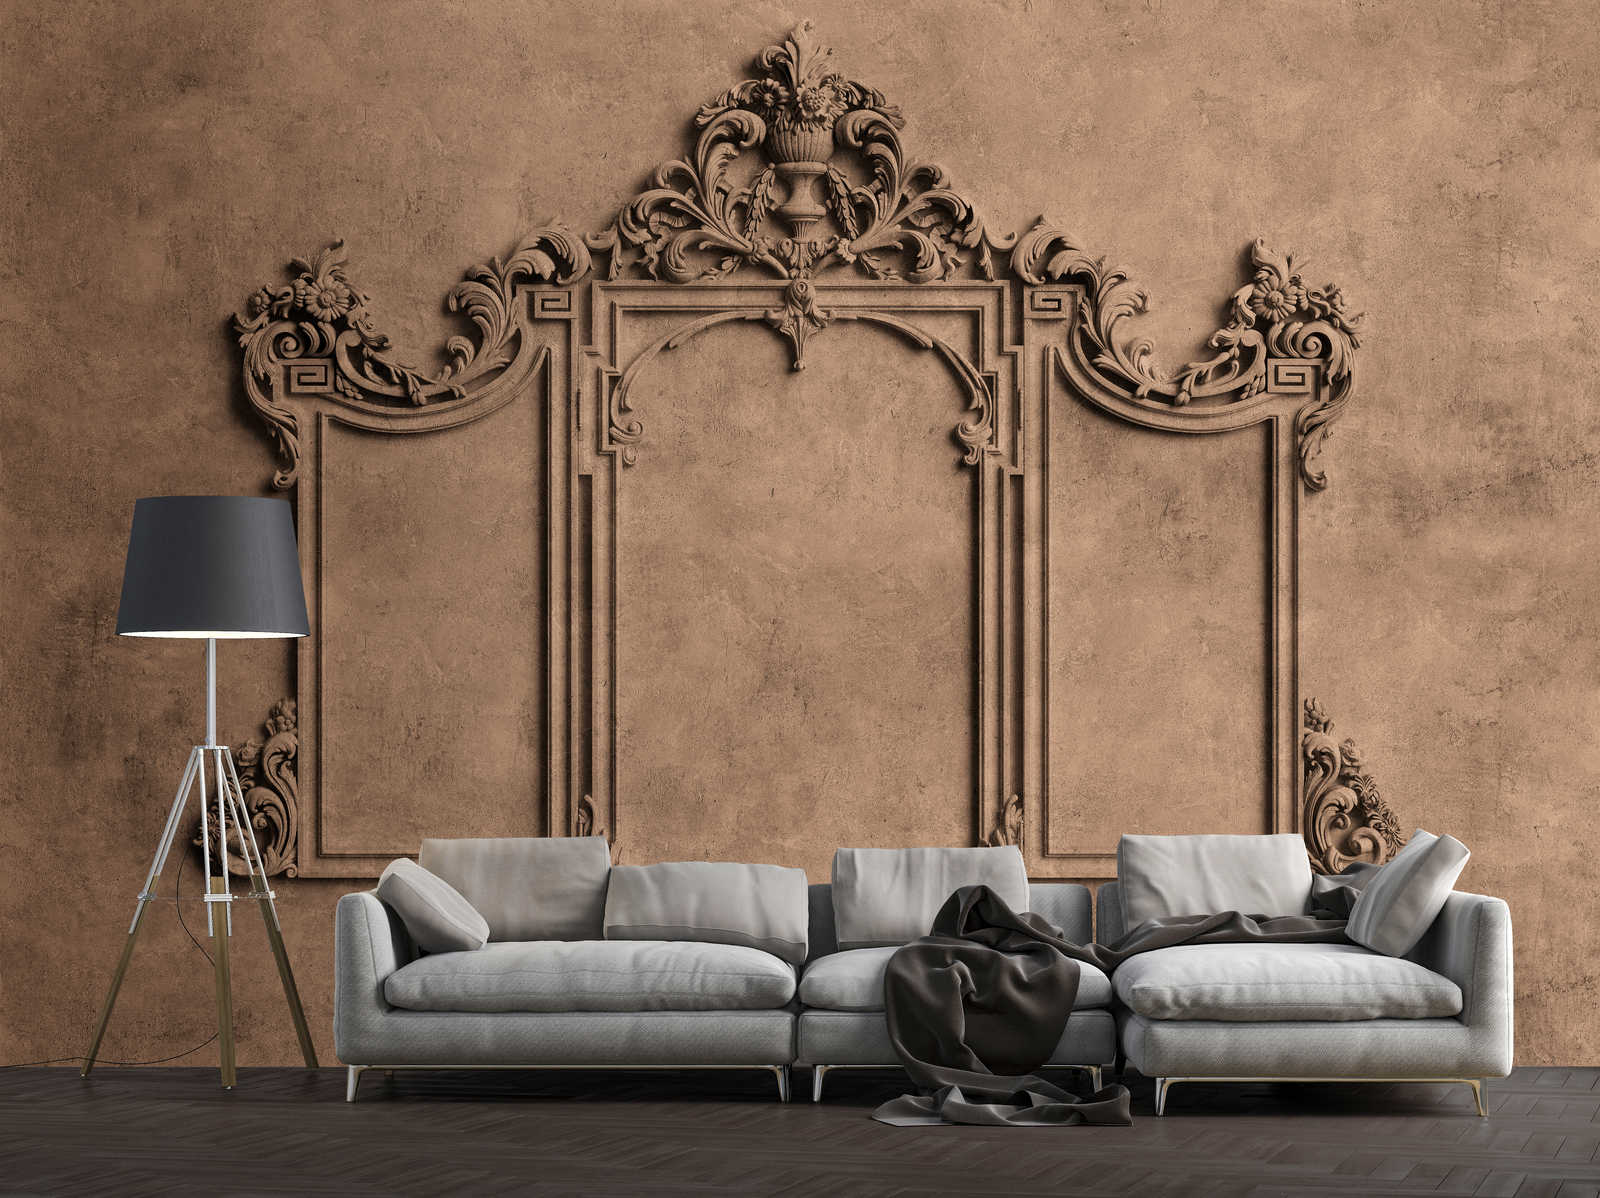             Lyon 1 - photo wallpaper 3D stucco frame & plaster look in brown
        